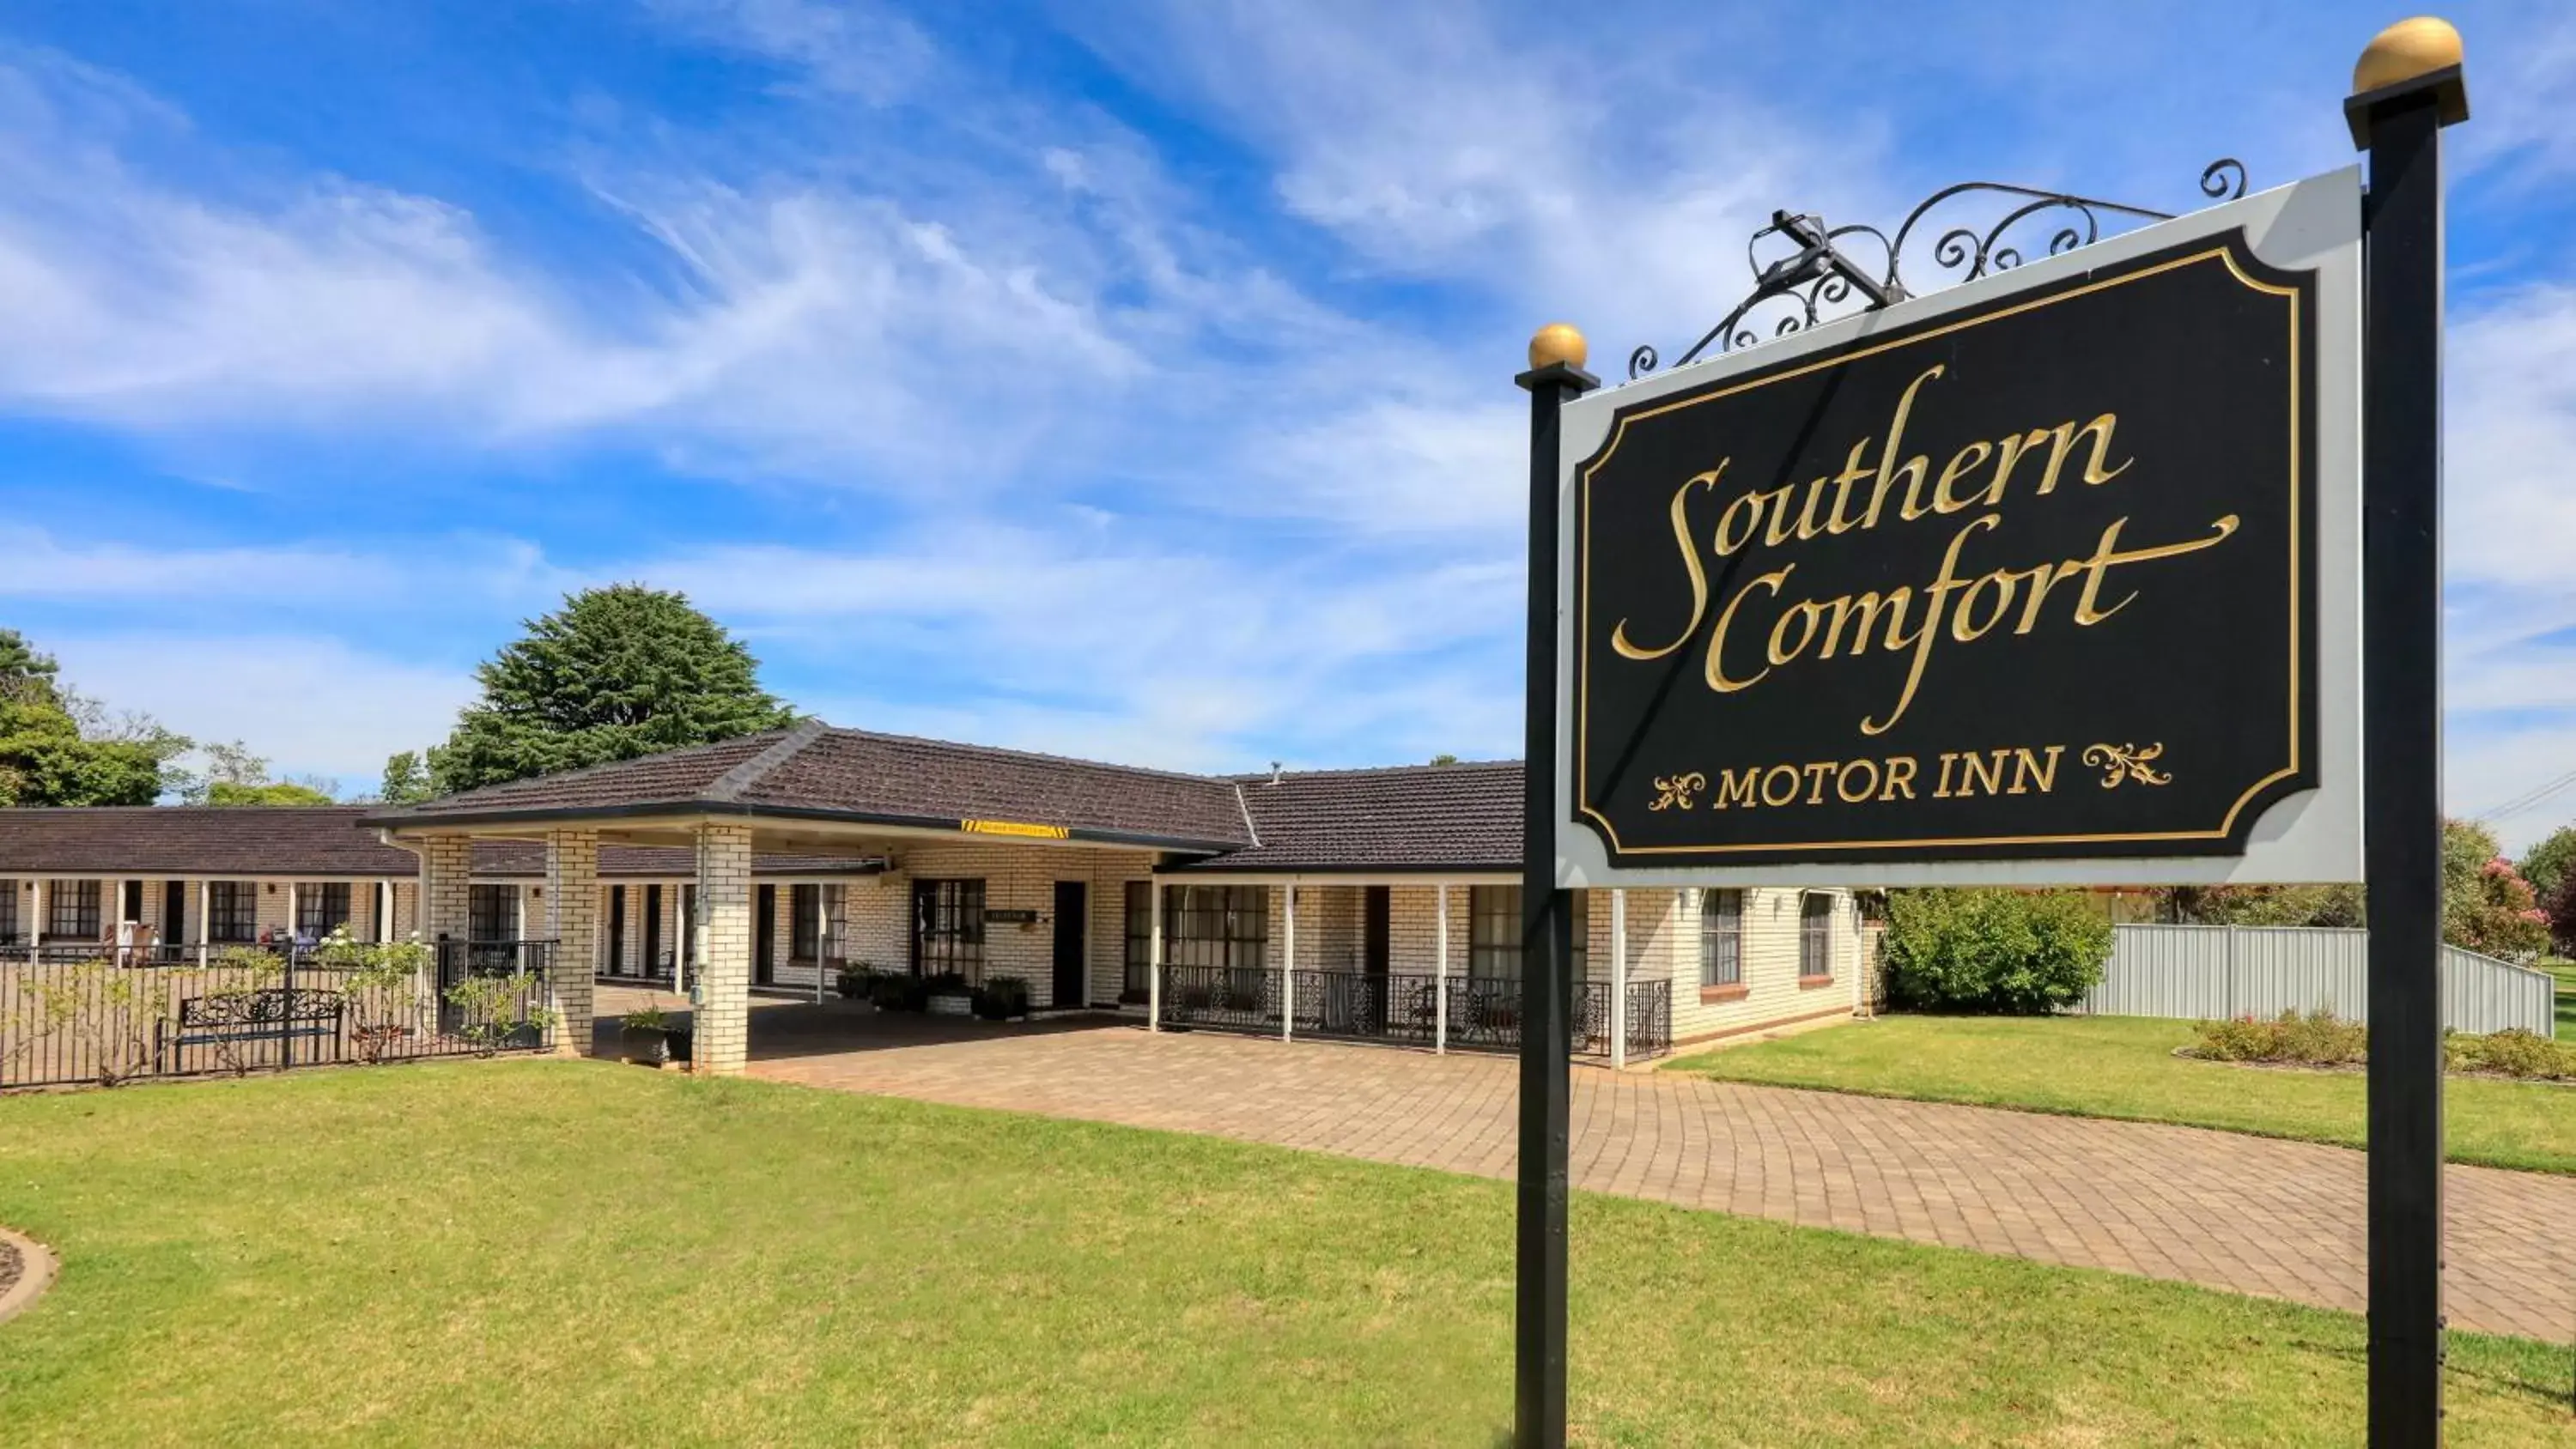 Property logo or sign, Property Building in Southern Comfort Motor Inn